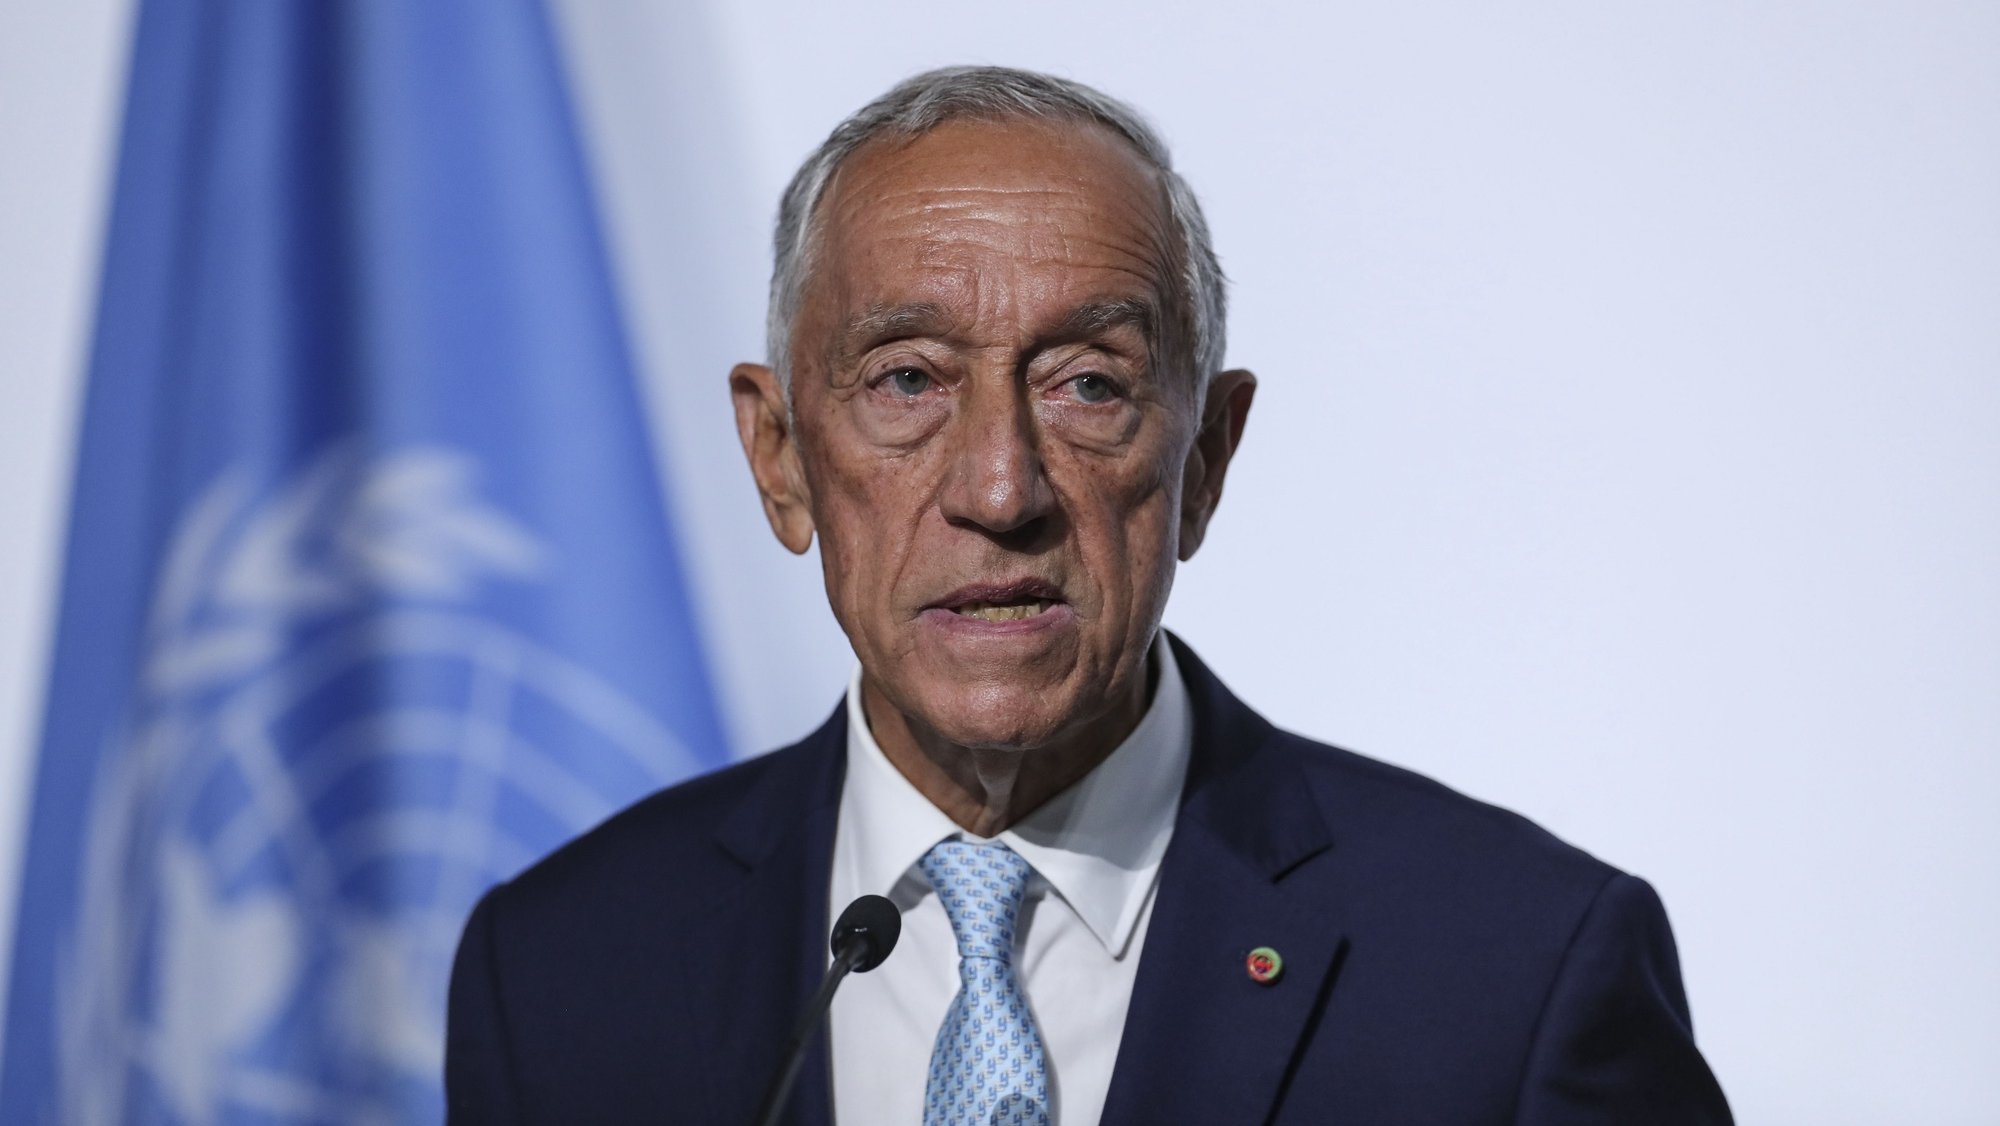 Portuguese President Marcelo Rebelo de Sousa during the press conference after the opening of the plenary session of UN Ocean Conference at Lisbon, 27th june 2022. MIGUEL A. LOPES/LUSA